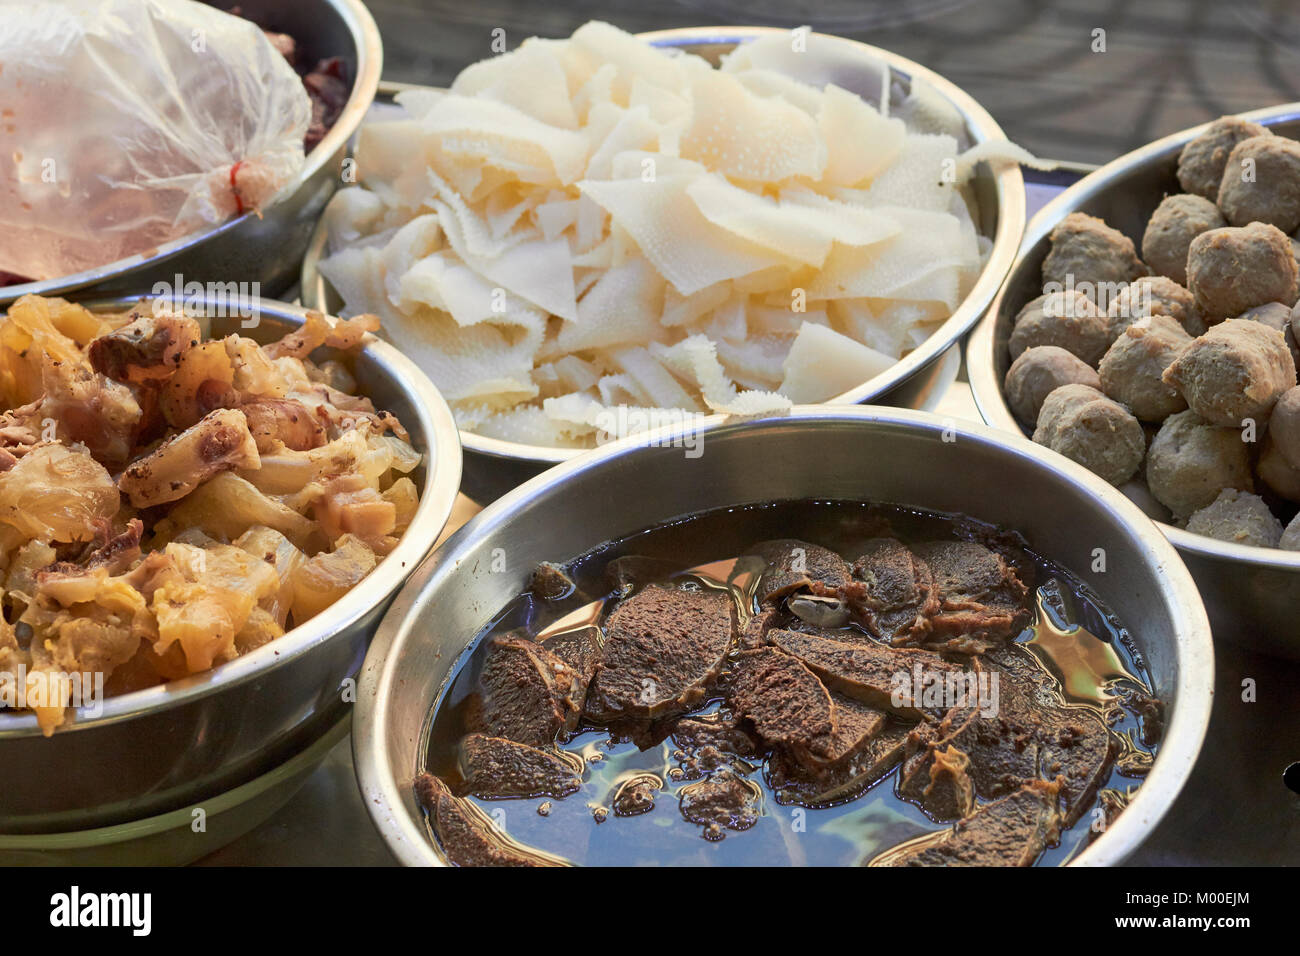 Bangkok street food vendor offering tripe and other beef offal Stock Photo